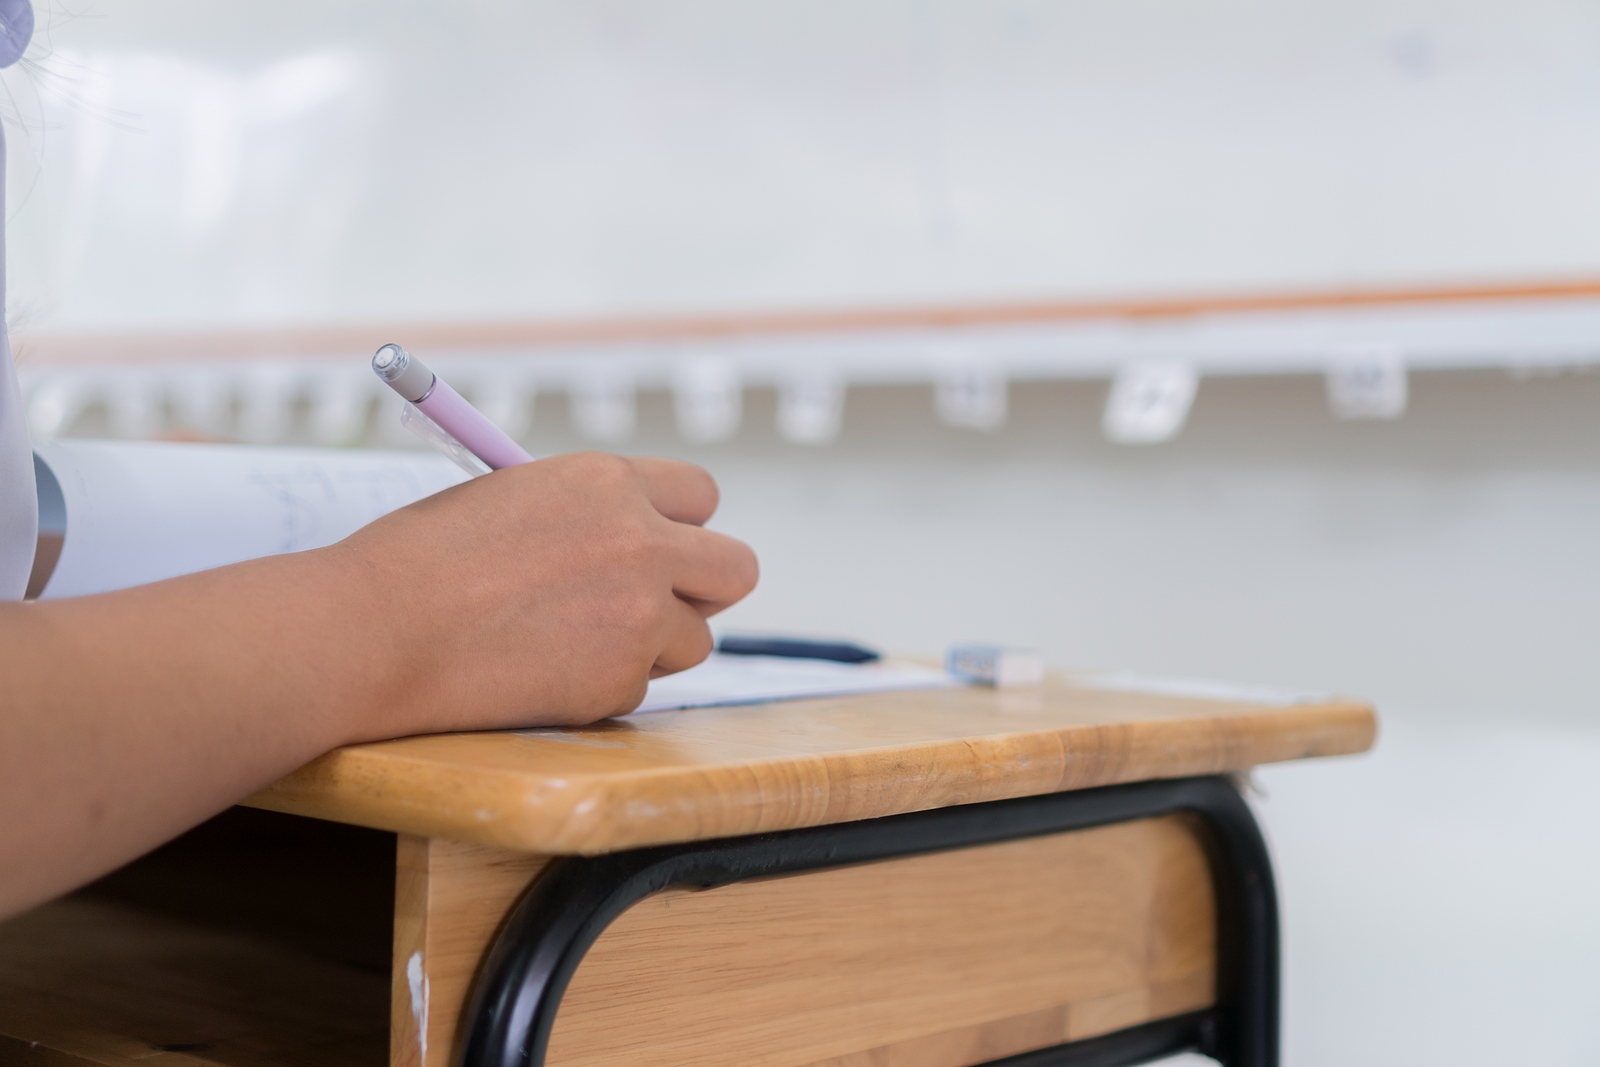 A young hand holds a pencil as they write something on the test in front of them. This could represent the benefits of neuropsychological testing in Tampa, FL. Your child can thrive academically with the help of neuropsych testing in Wesley Chapel, FL. Learn more!